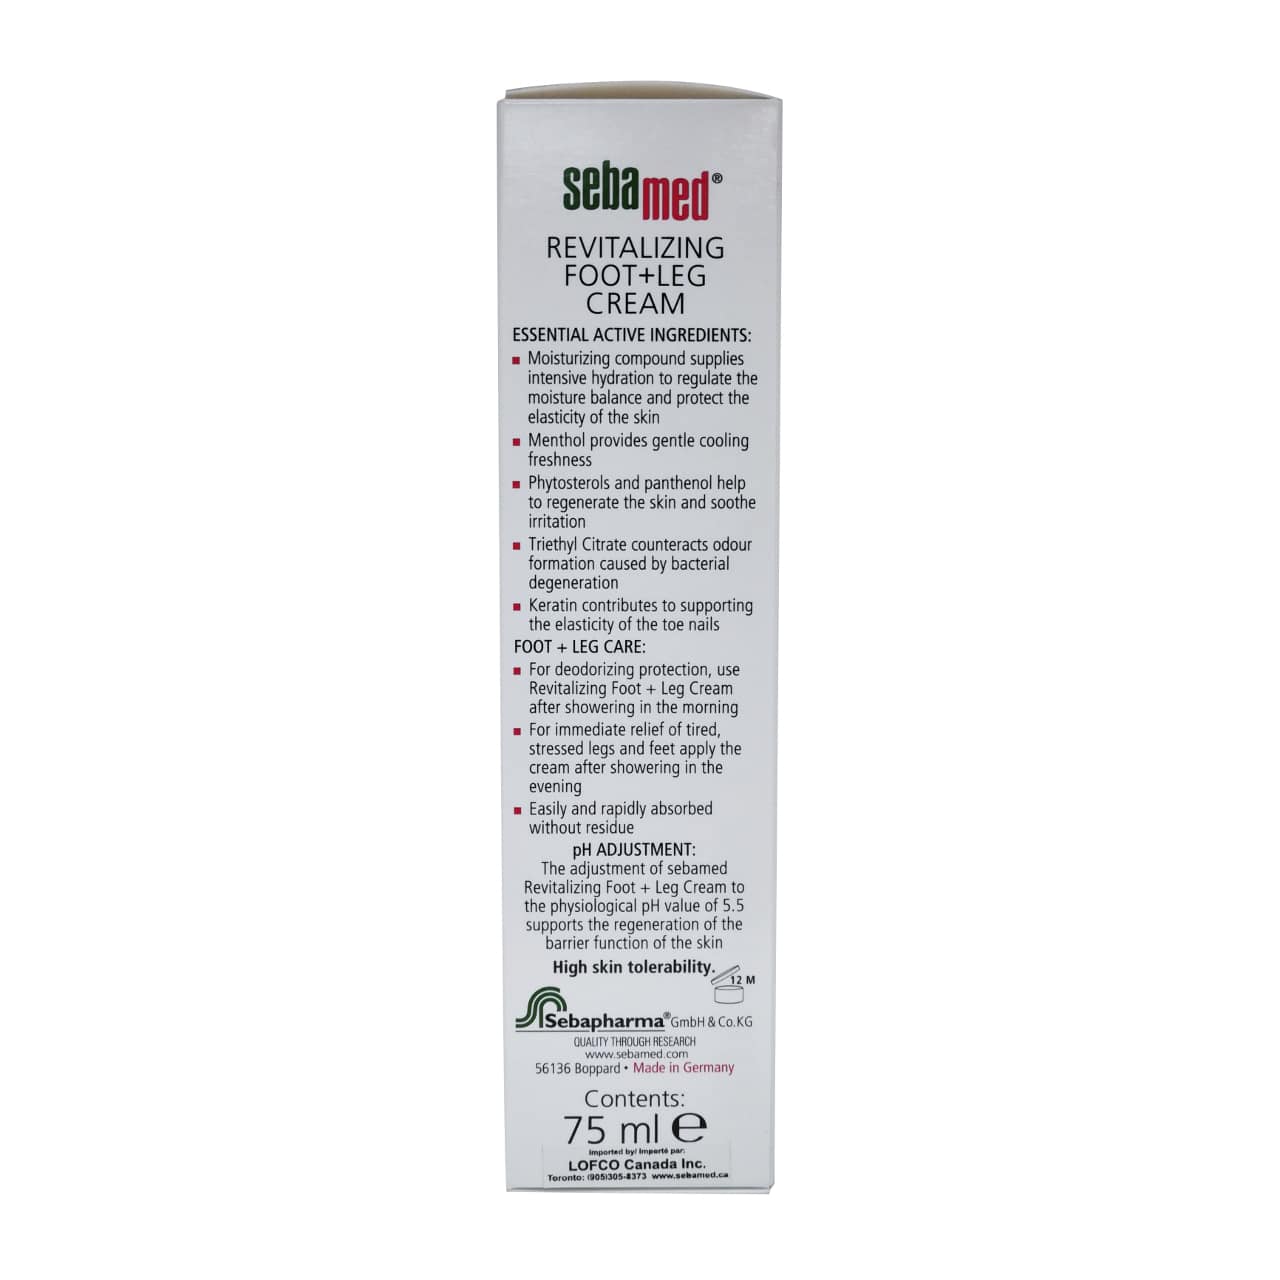 Product ingredients for Sebamed Revitalizing Foot and Leg Cream